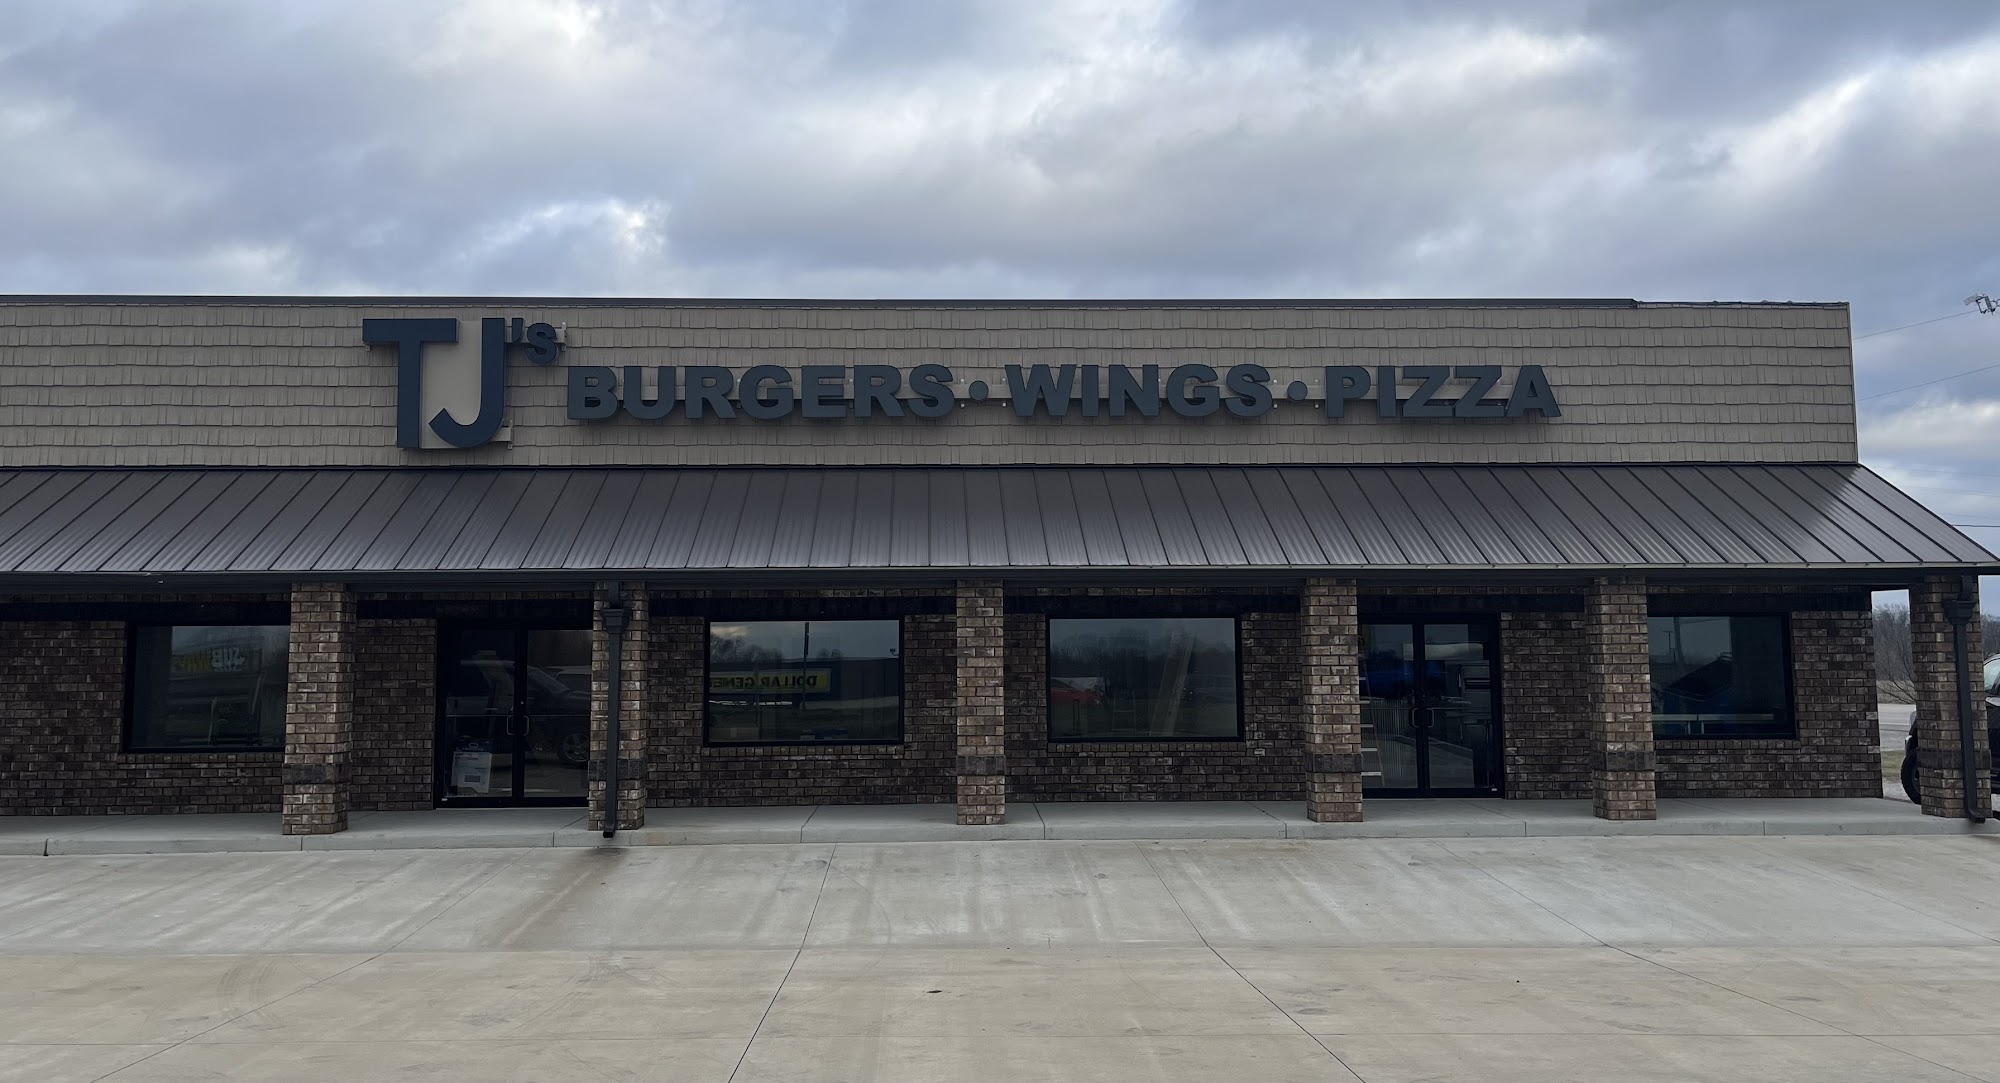 TJ's Burgers, Wings, and Pizza